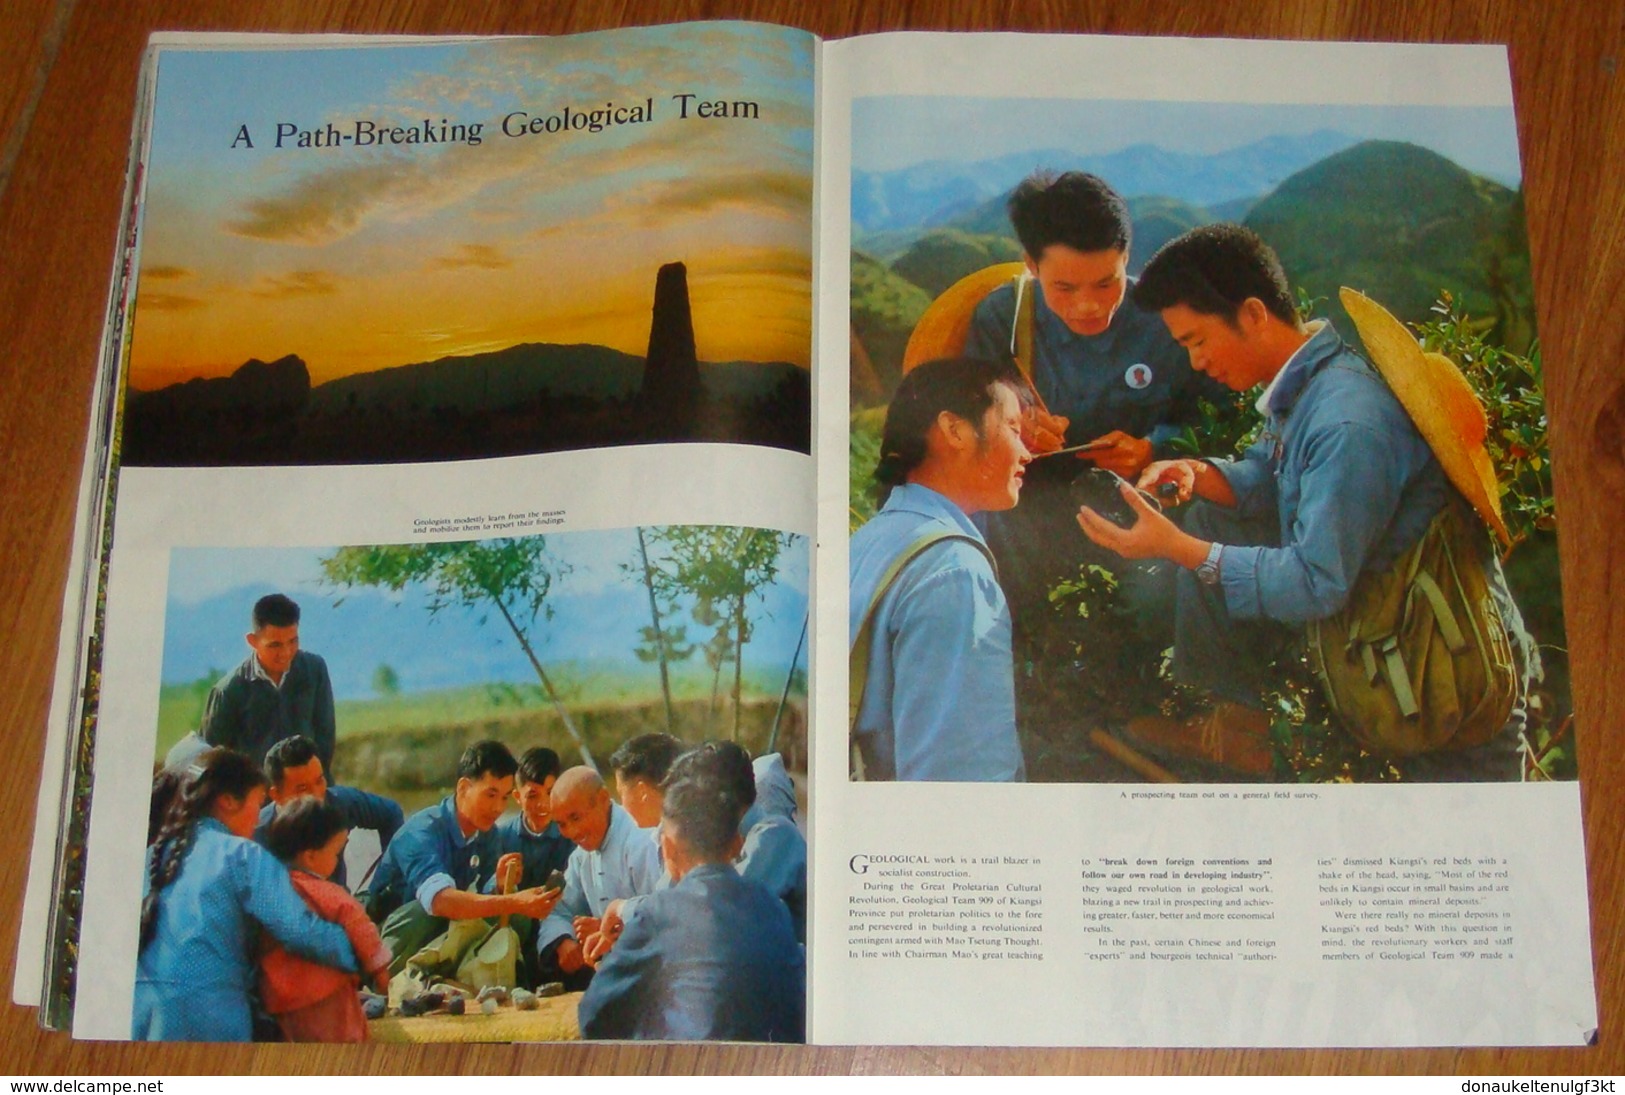 CHINA PICTORIAL MAGAZINE1971/2 MAO TSETUNG,RELATIONSHIP WITH ALBANIA 37 X 26 cm. ALL PAGES. PLEASE SEE PHOTOS.